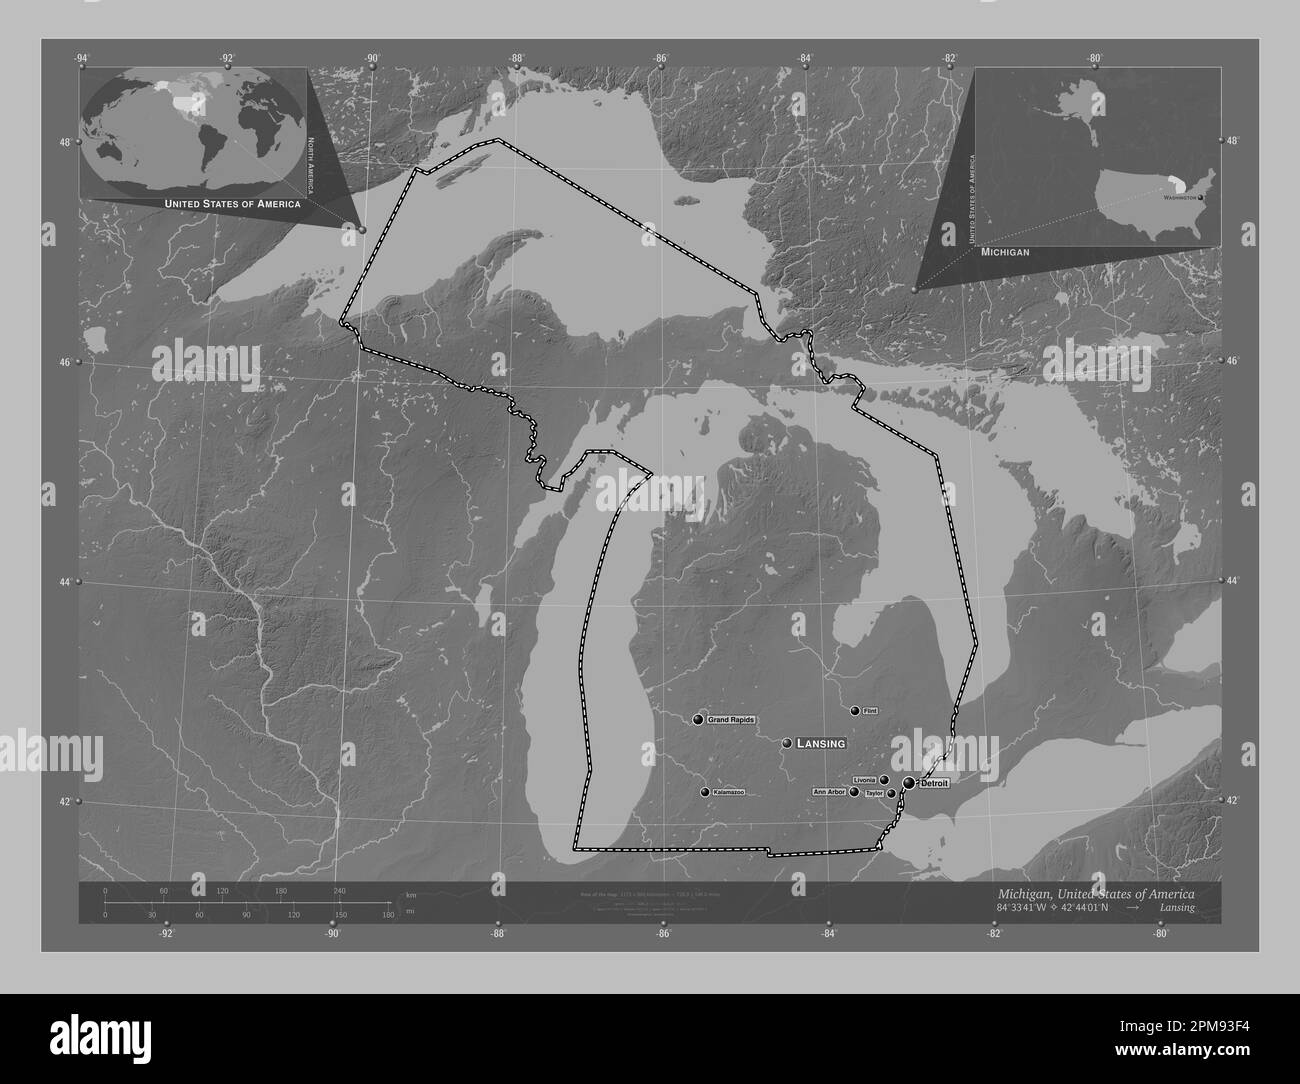 Michigan, state of United States of America. Grayscale elevation map with lakes and rivers. Locations and names of major cities of the region. Corner Stock Photo